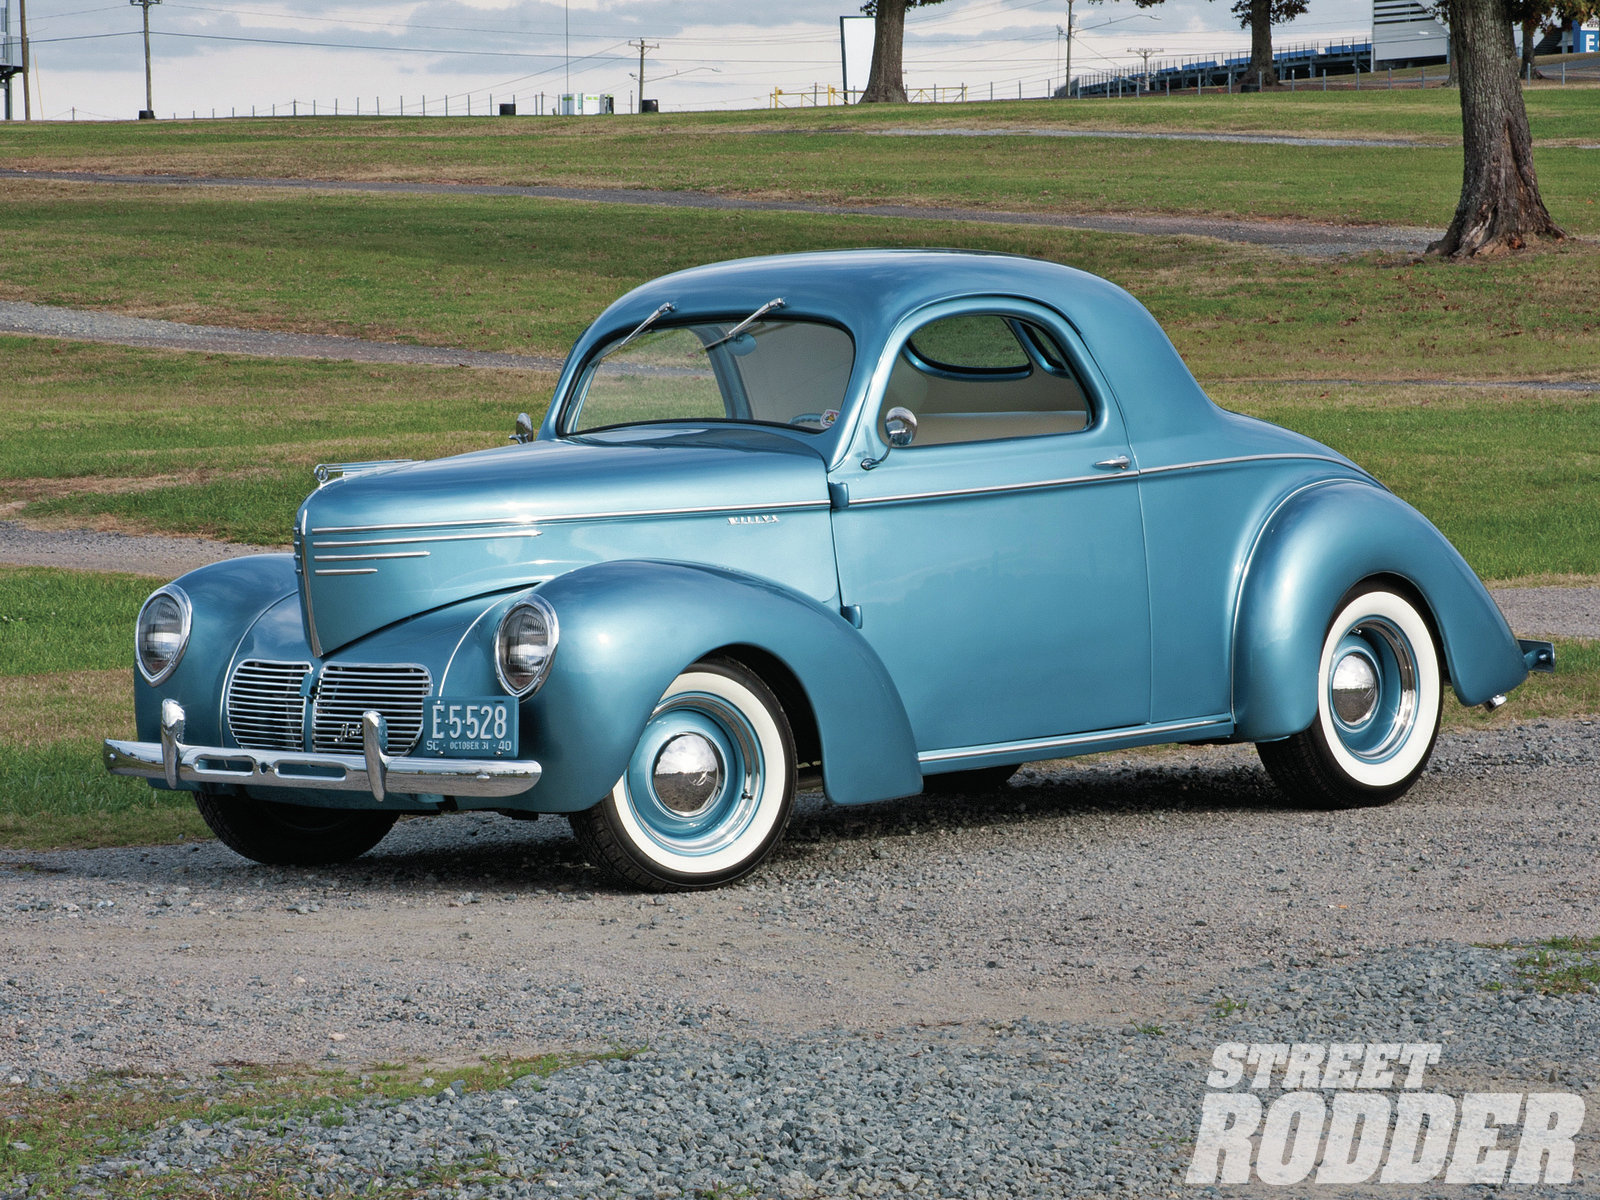 1940 Chevrolet Coupe Backgrounds on Wallpapers Vista